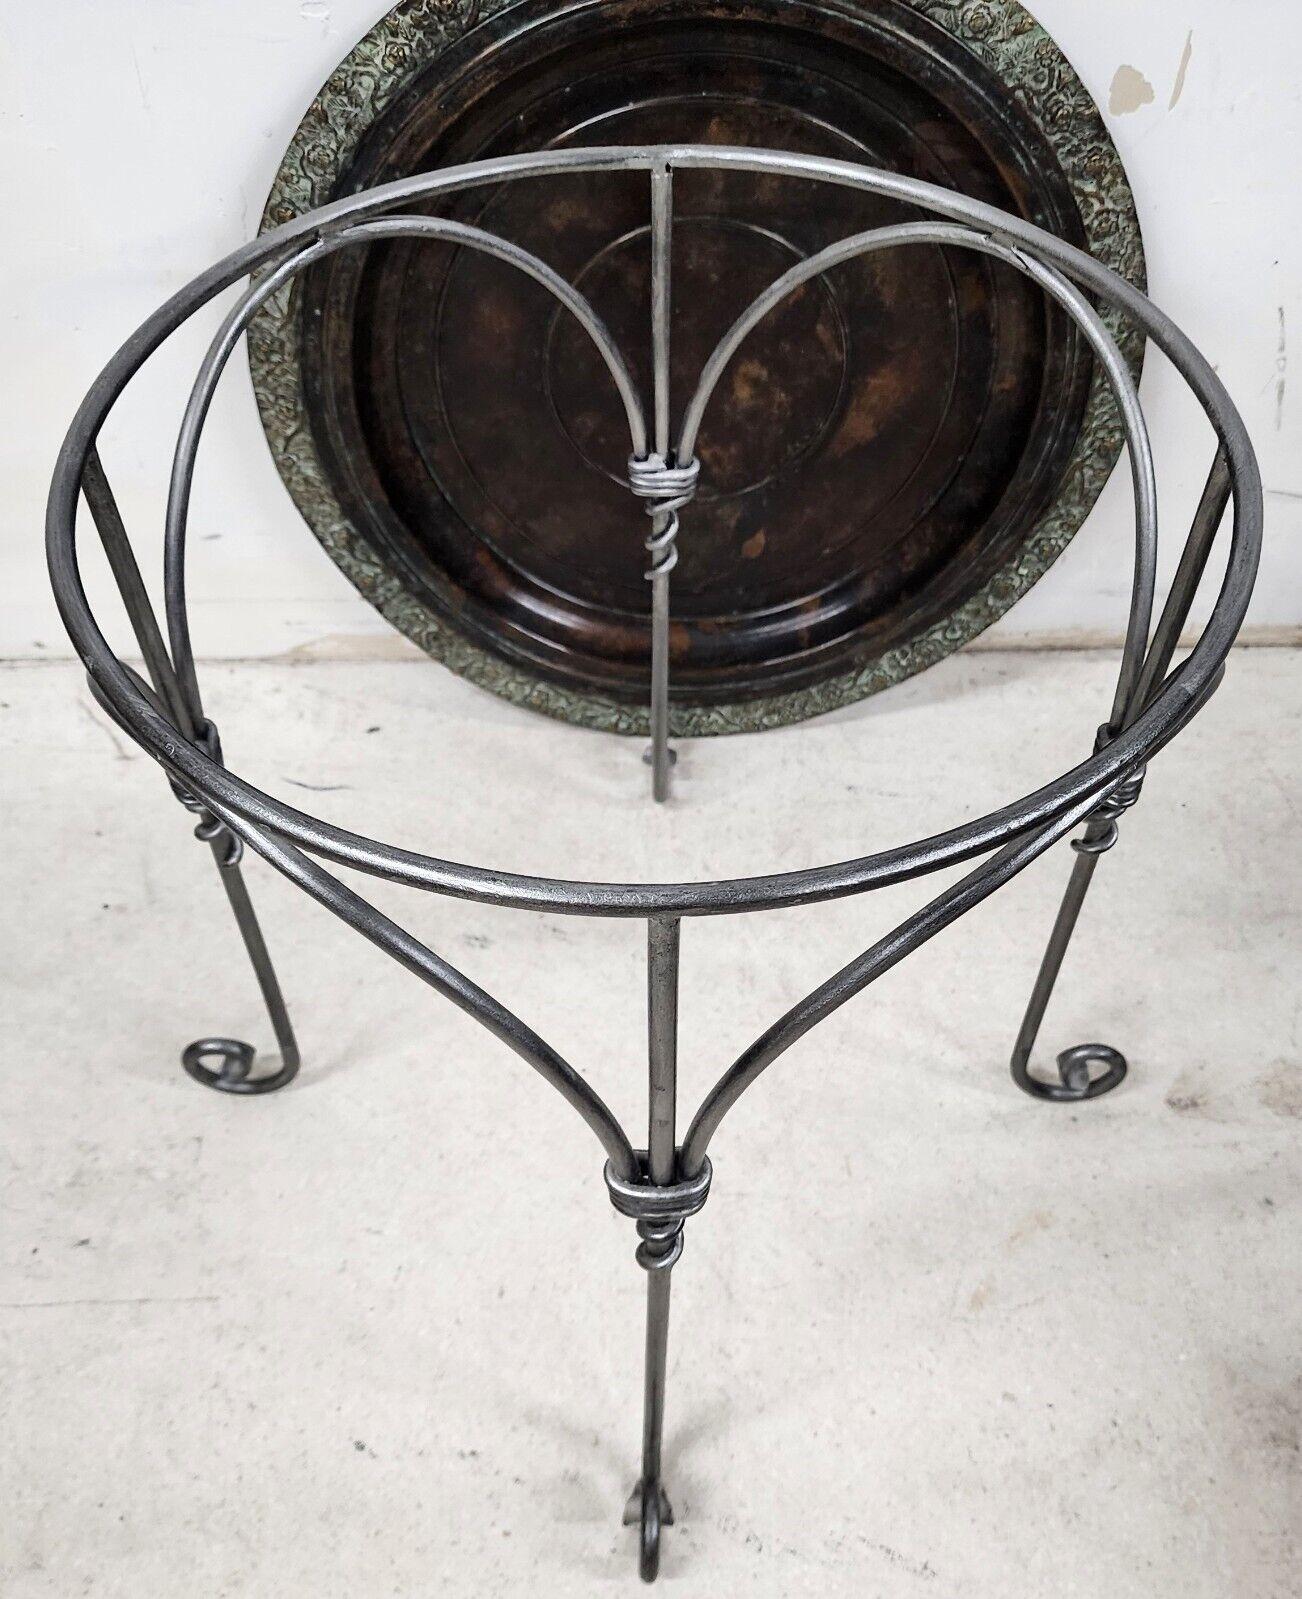 For FULL item description click on CONTINUE READING at the bottom of this page.

Offering One Of Our Recent Palm Beach Estate Fine Furniture Acquisitions Of A 
1980s Maitland Smith Brass Serving Tray Table
Top tray is substantial and